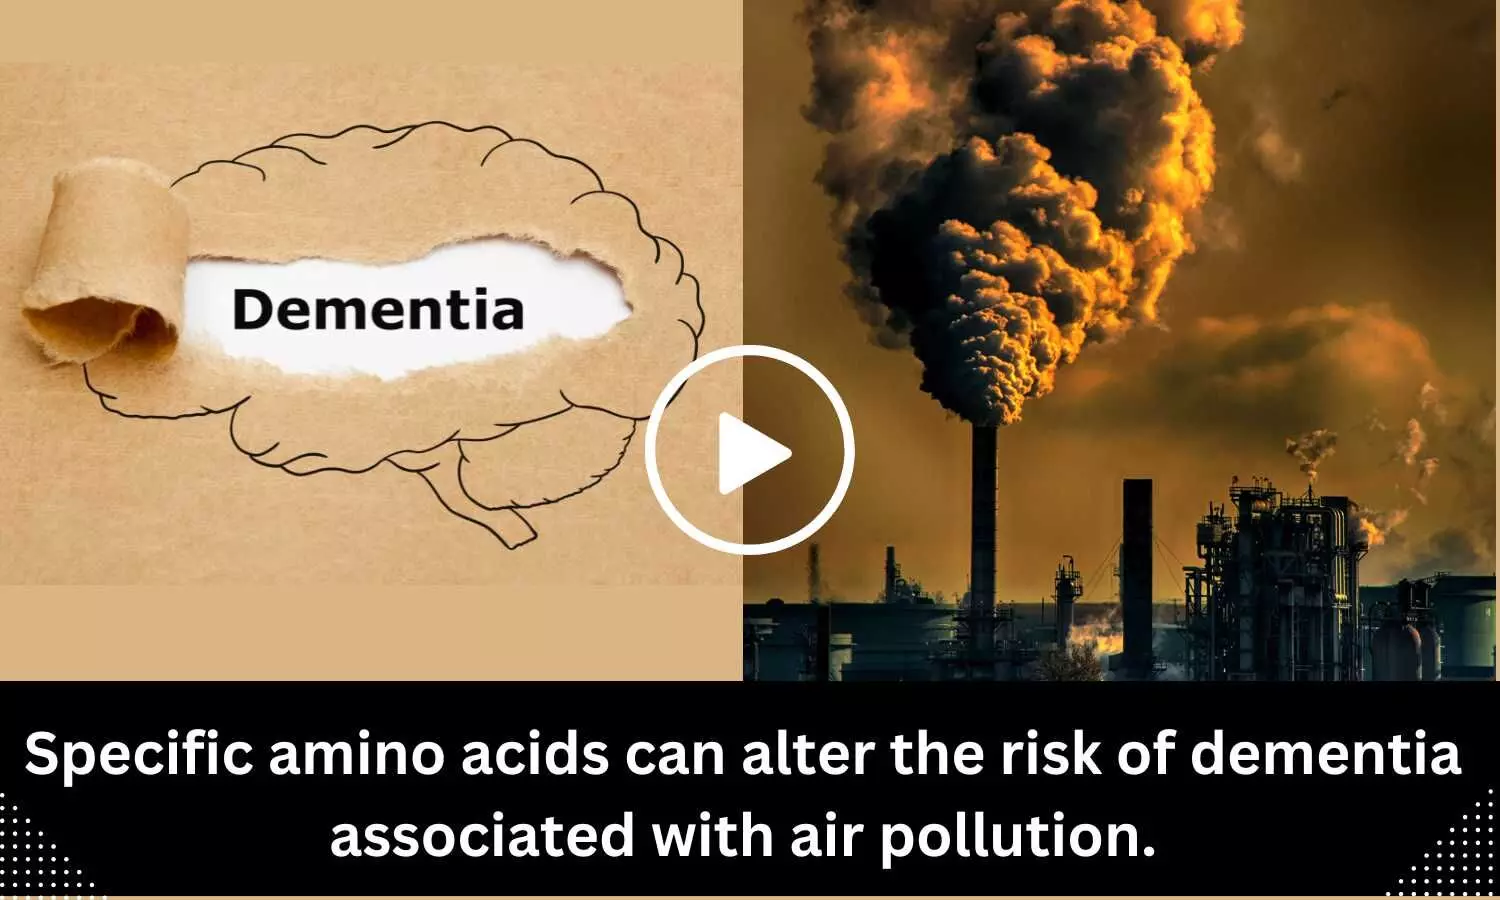 Specific amino acids can alter the risk of dementia associated with air pollution